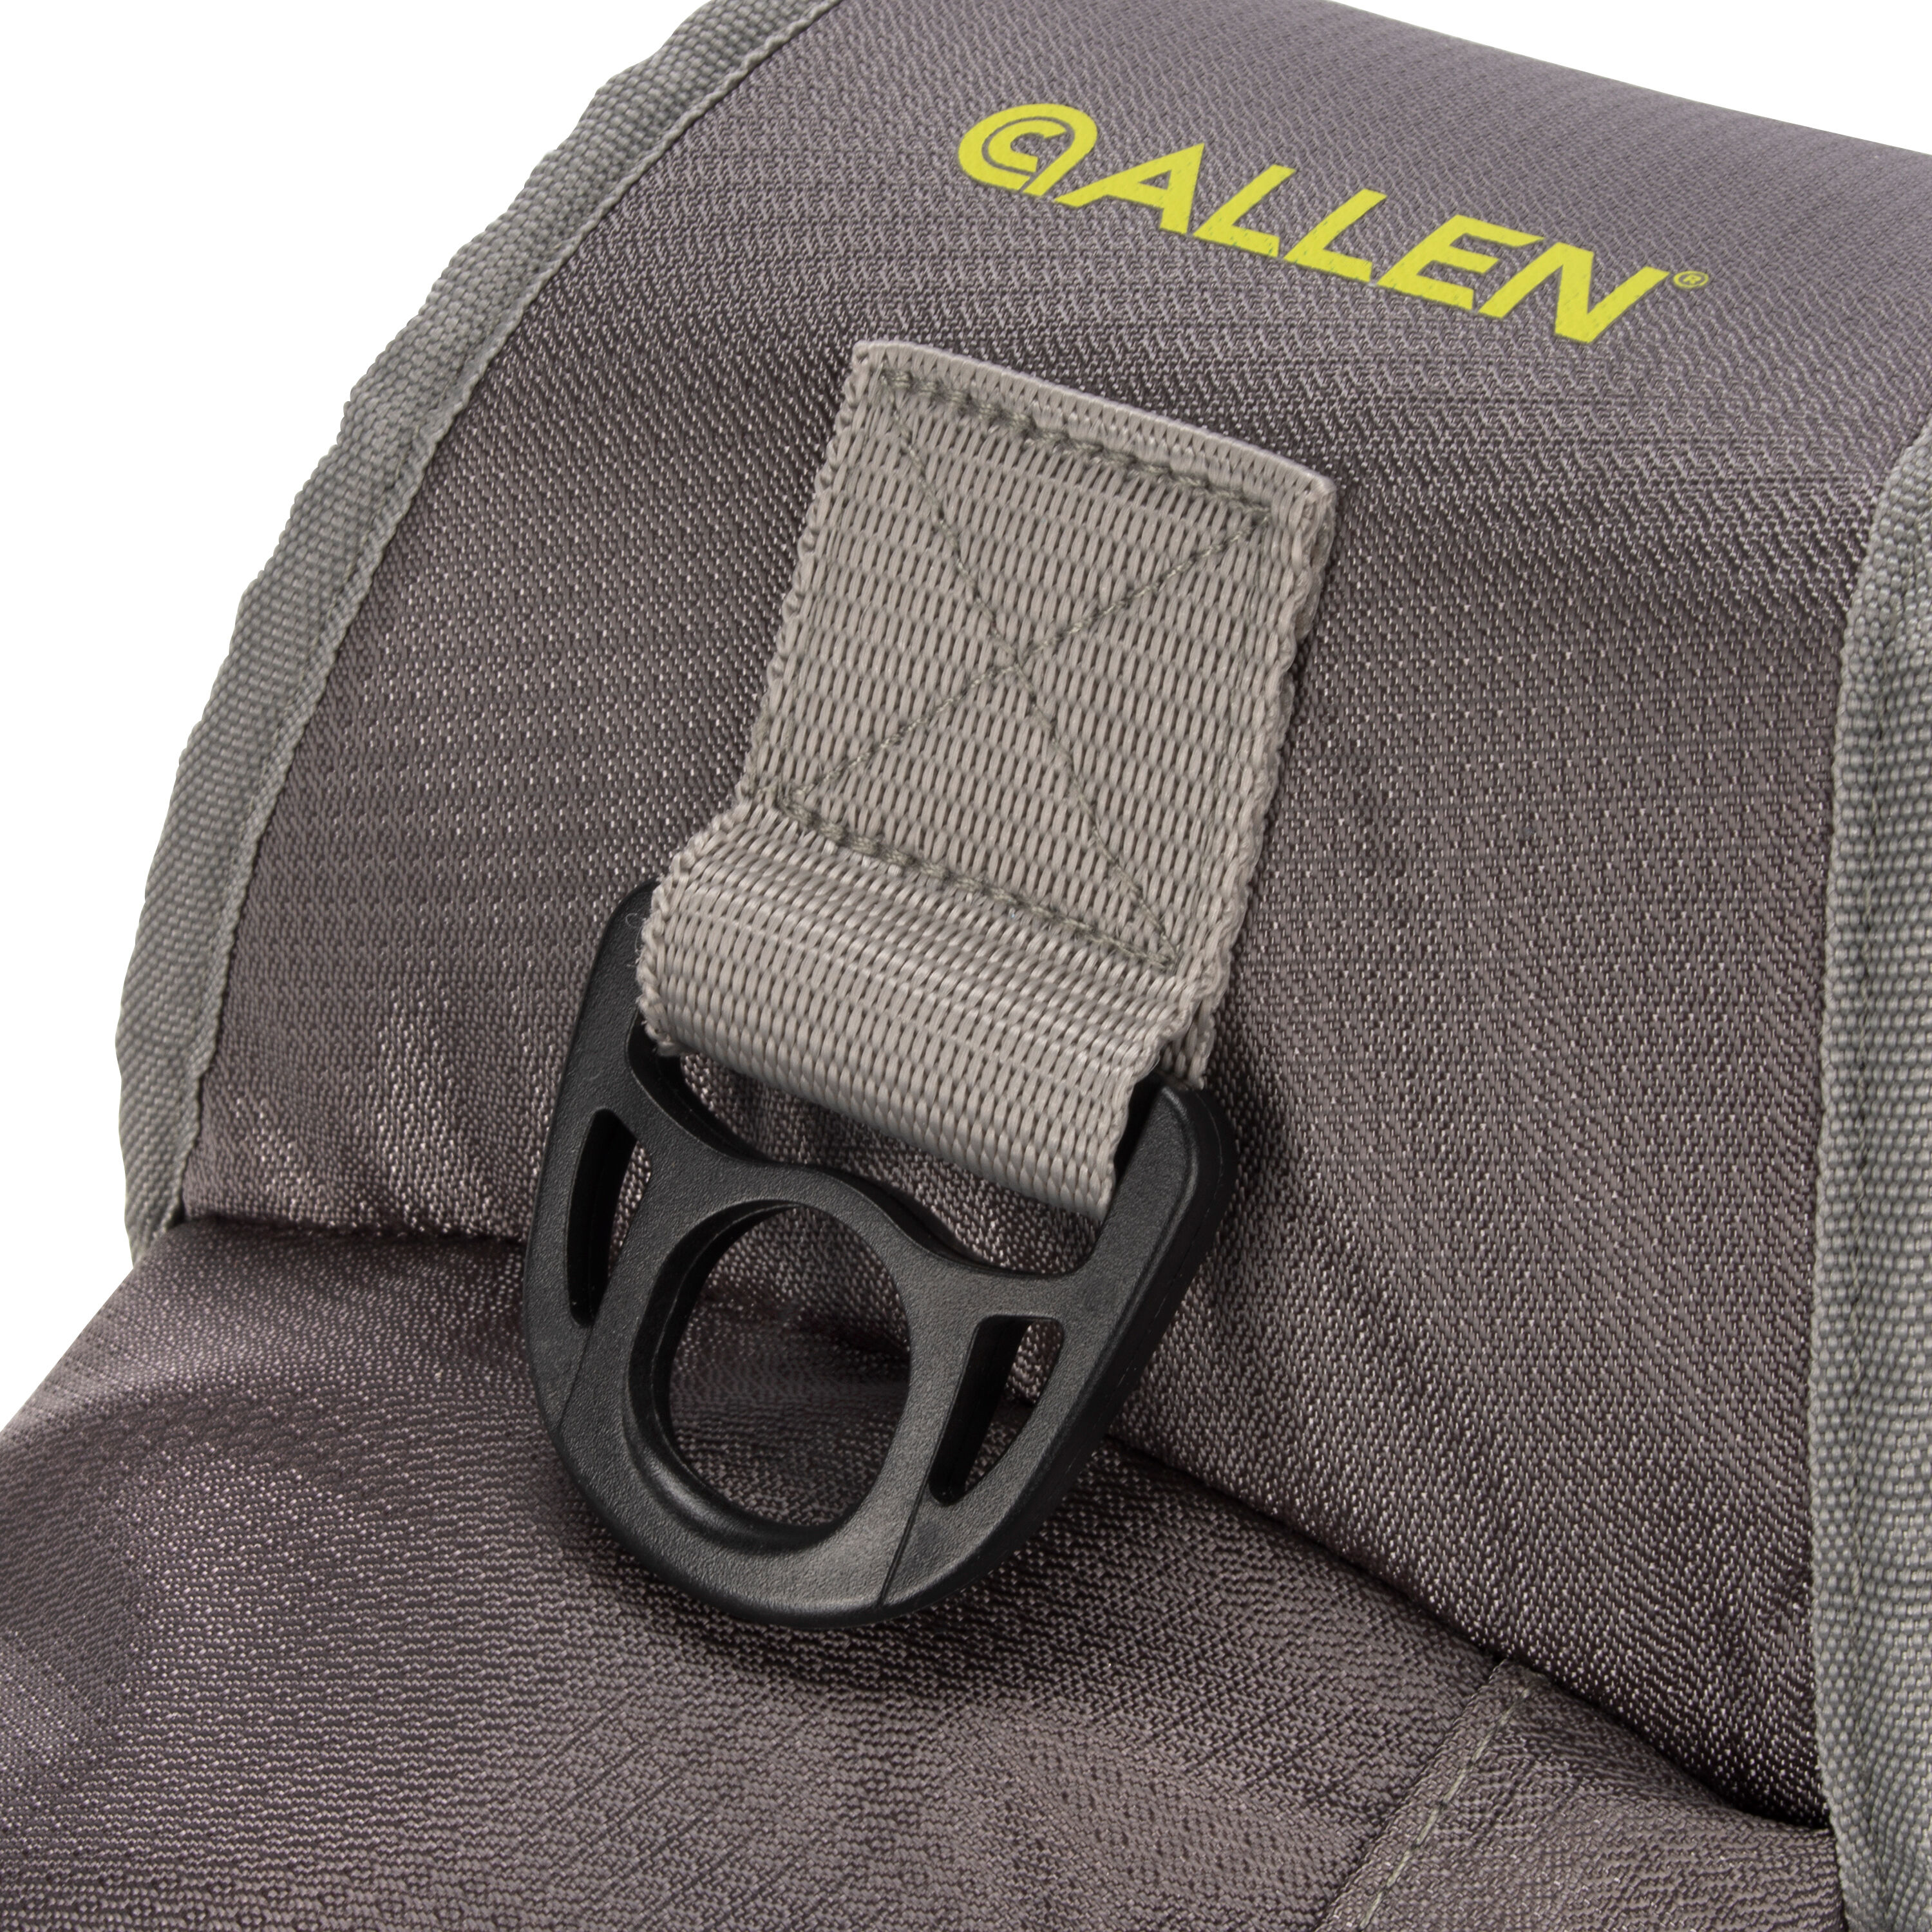 Allen Platte River Gear Bag-Olive  Fishing tackle bags, Bags, Fly